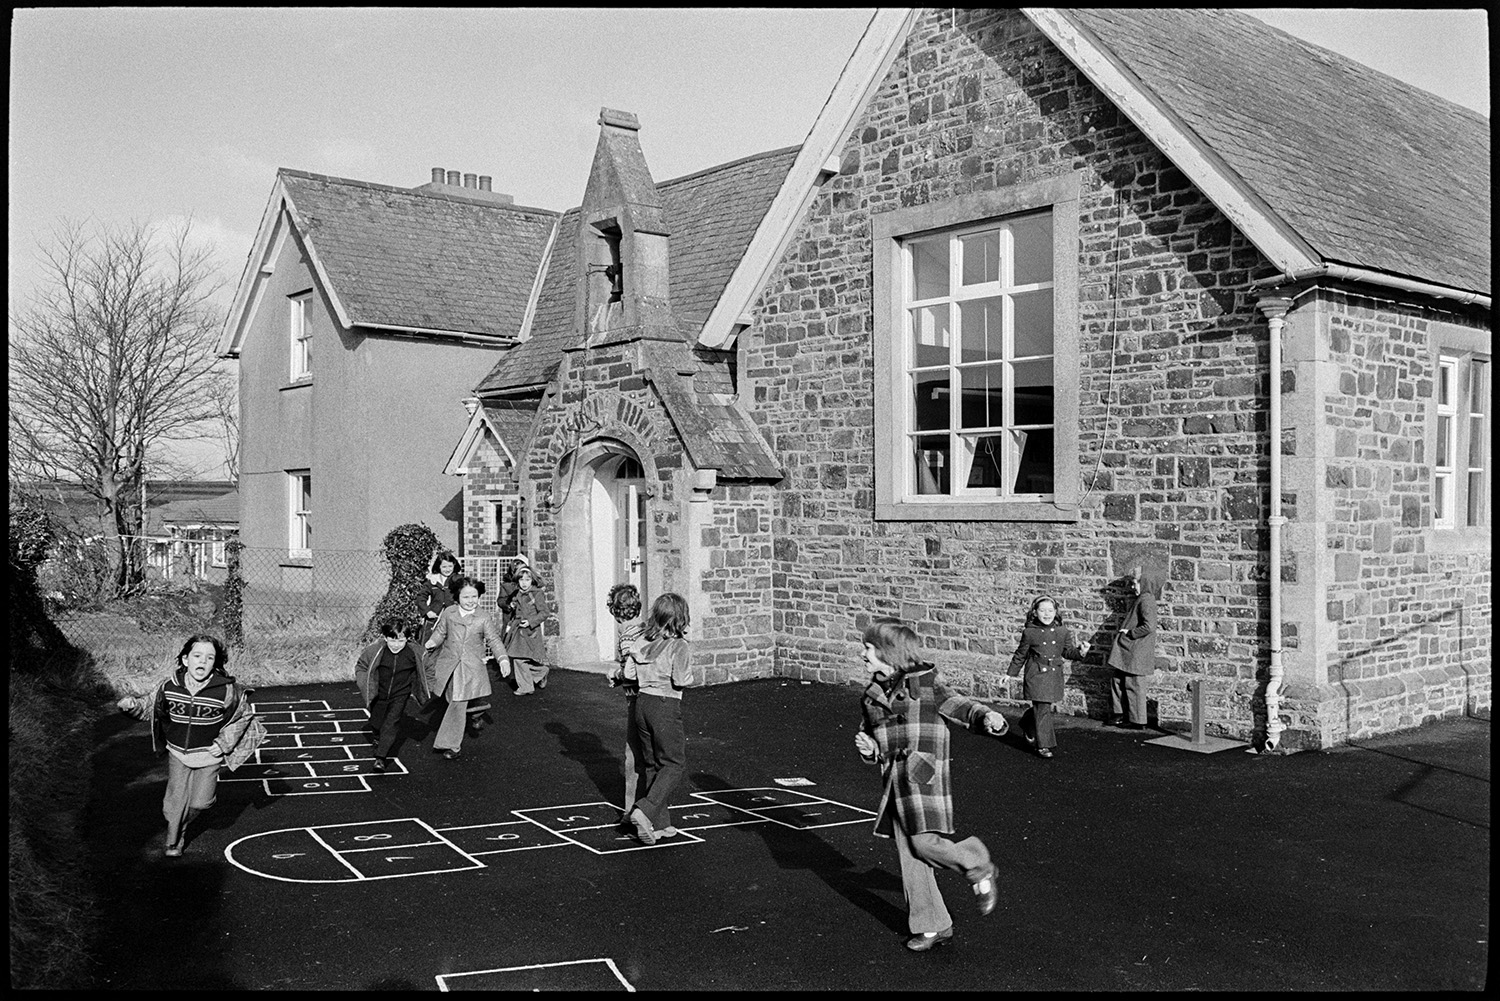 School children playing in playground and on village green, the kitchen. 
[Schoolchildren playing and running around the playground at Burrington Primary School. Hopscotch are painted on the playground floor.]